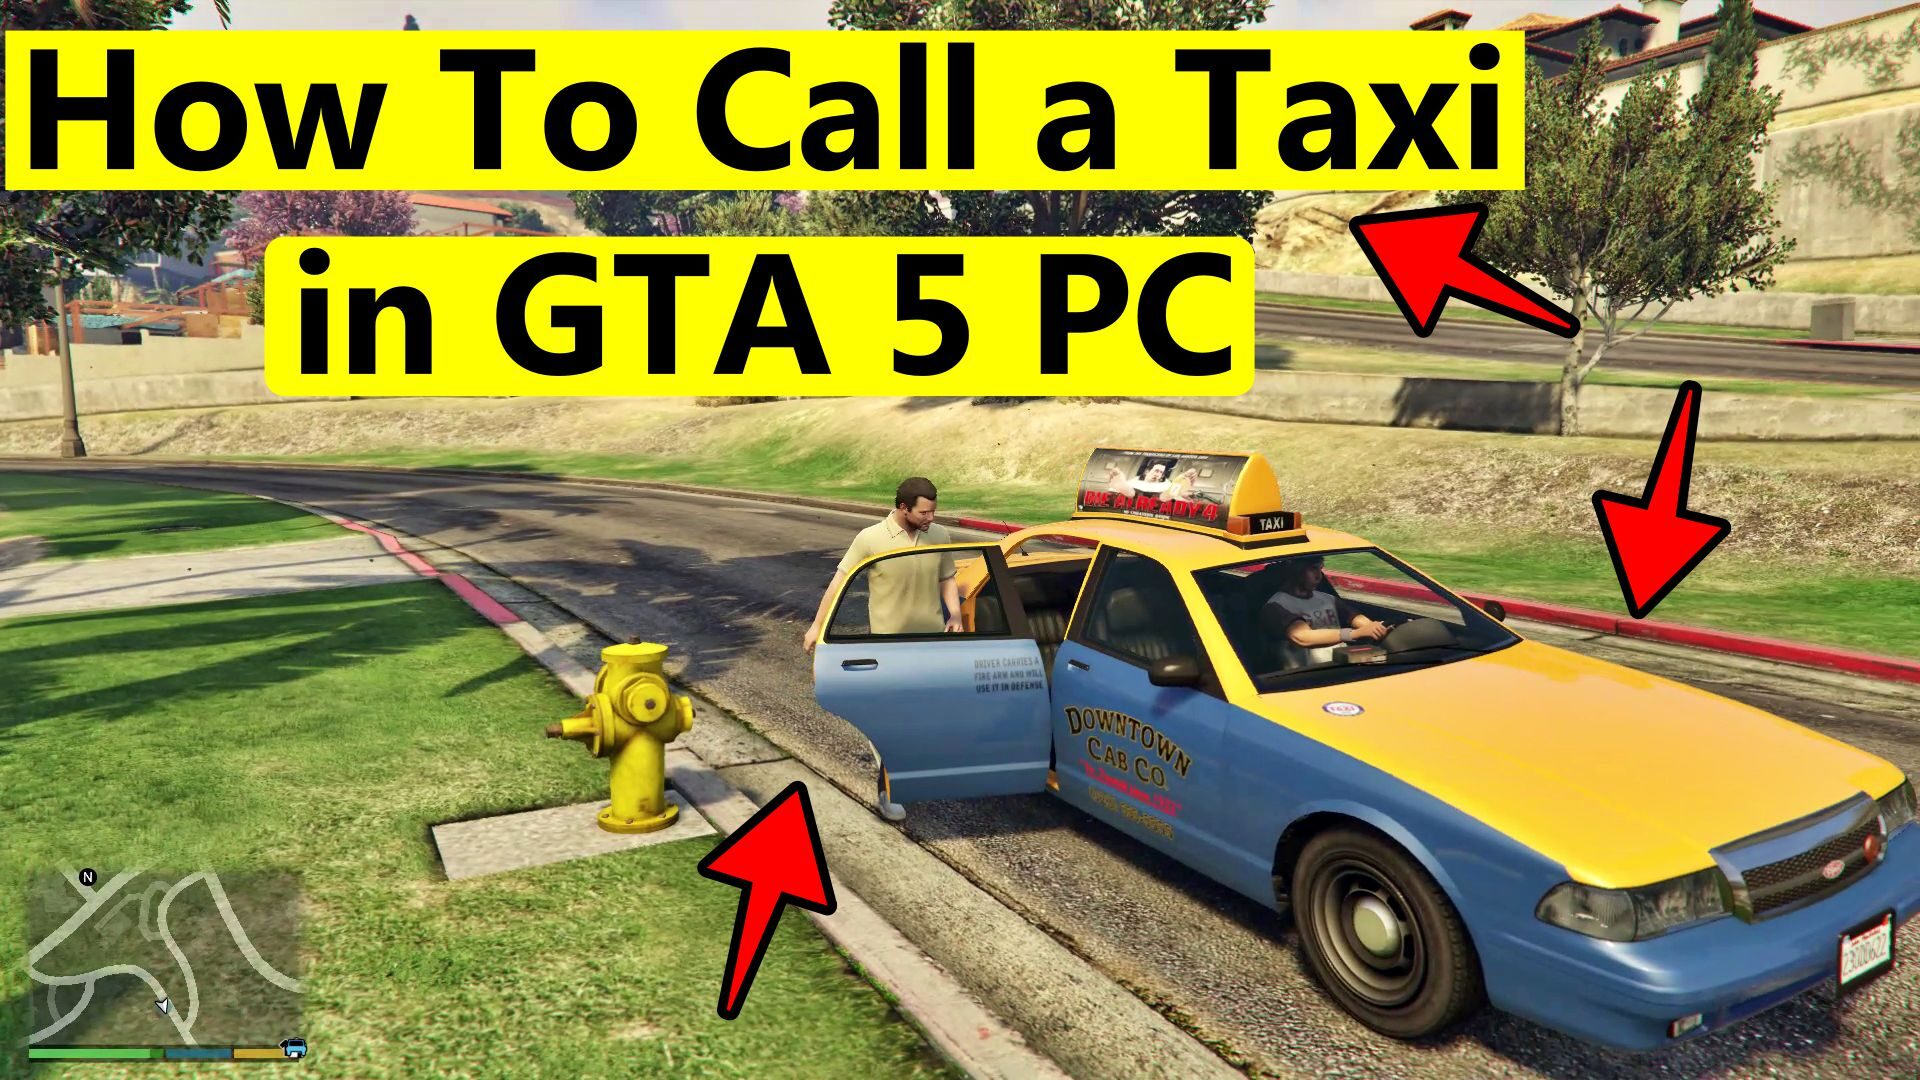 How To Call a Taxi to Book taxi in GTA 5 PC Game